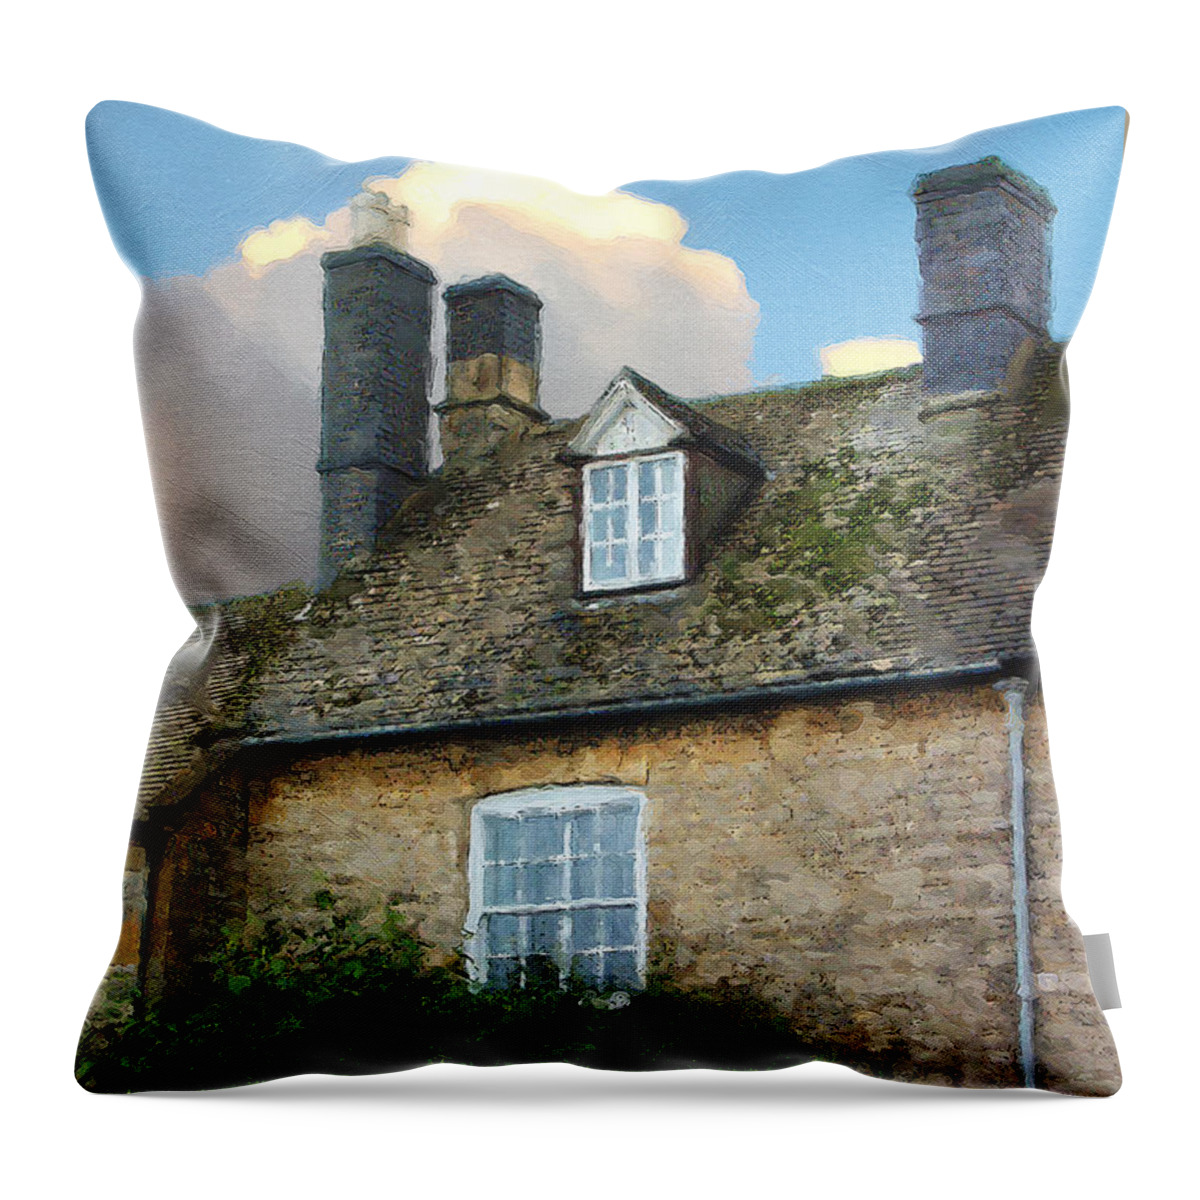 Stow-in-the-wold Throw Pillow featuring the photograph Stow Chimneys by Brian Watt